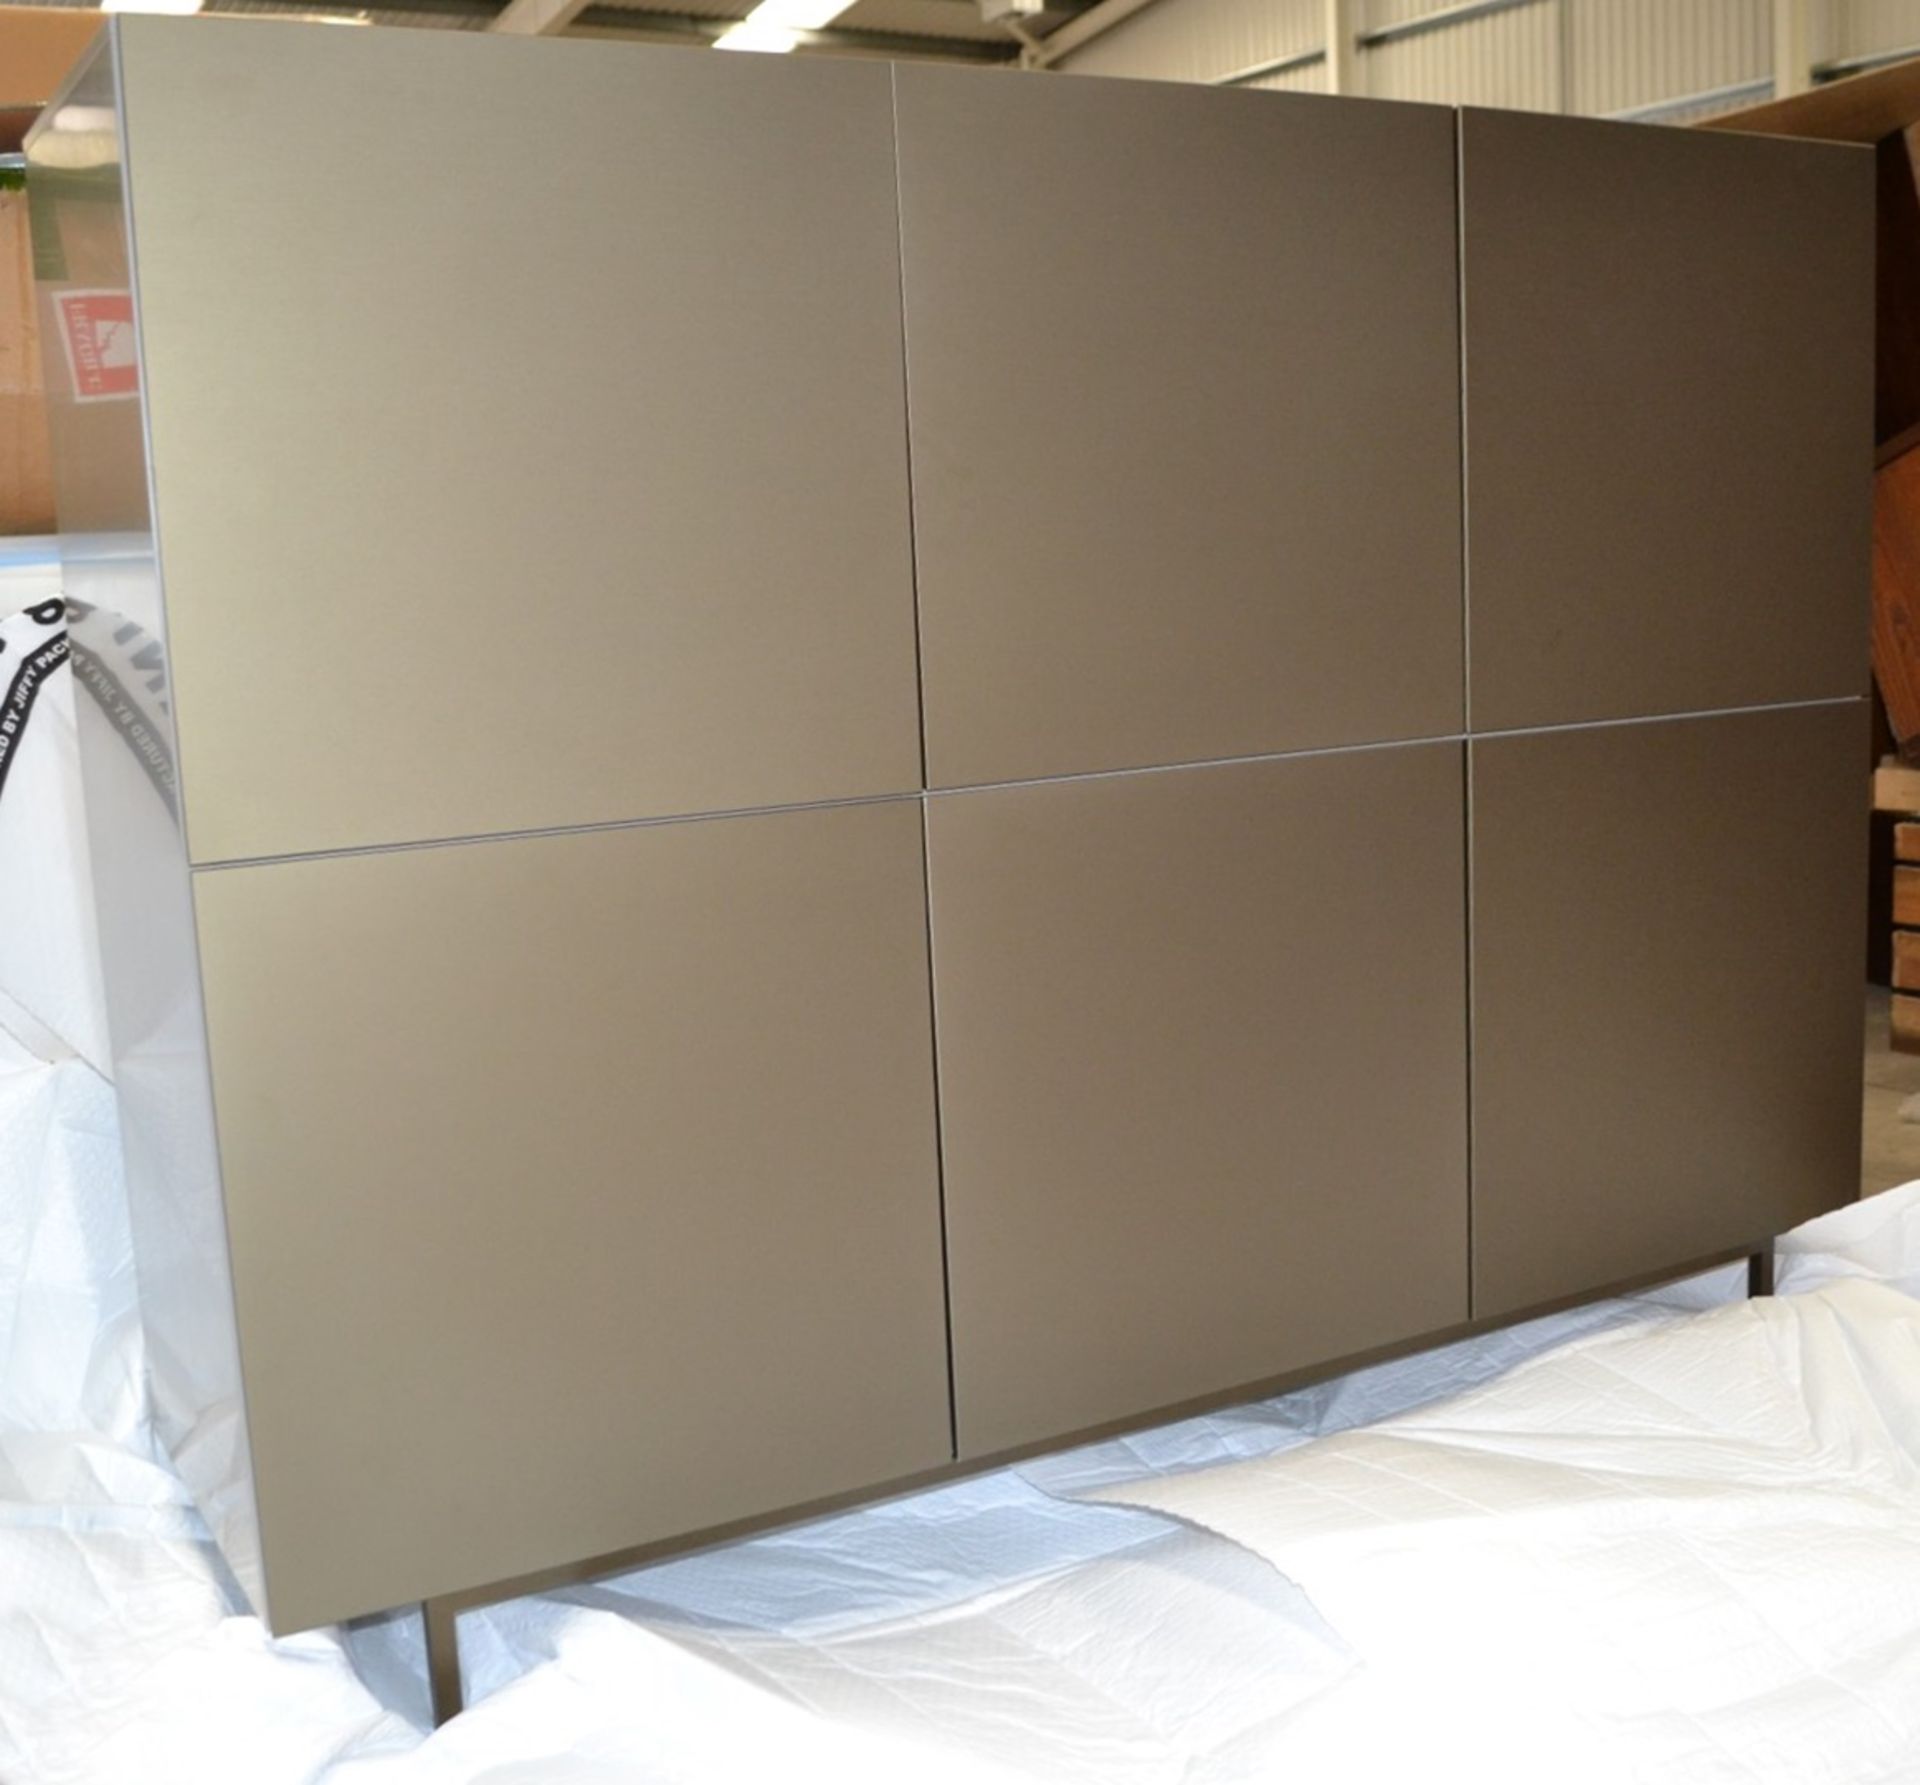 1 x LIGNE ROSET 'Book And Look' 6-Door Sideboard With Bronzed Fronts - Dimensions: H120 x 45 x 157cm - Image 3 of 11